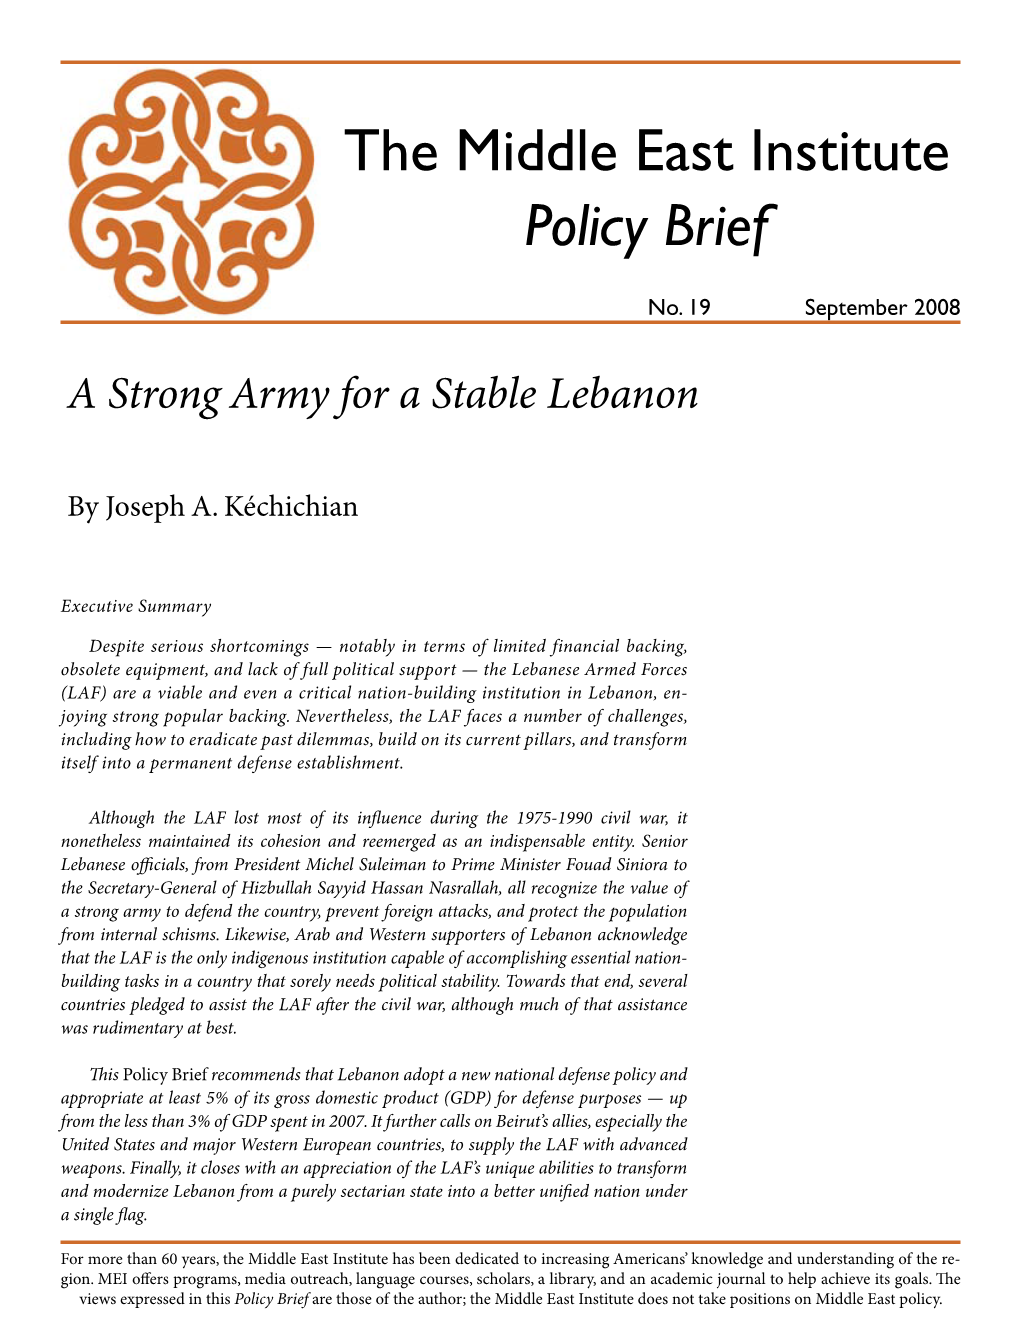 A Strong Army for a Stable Lebanon